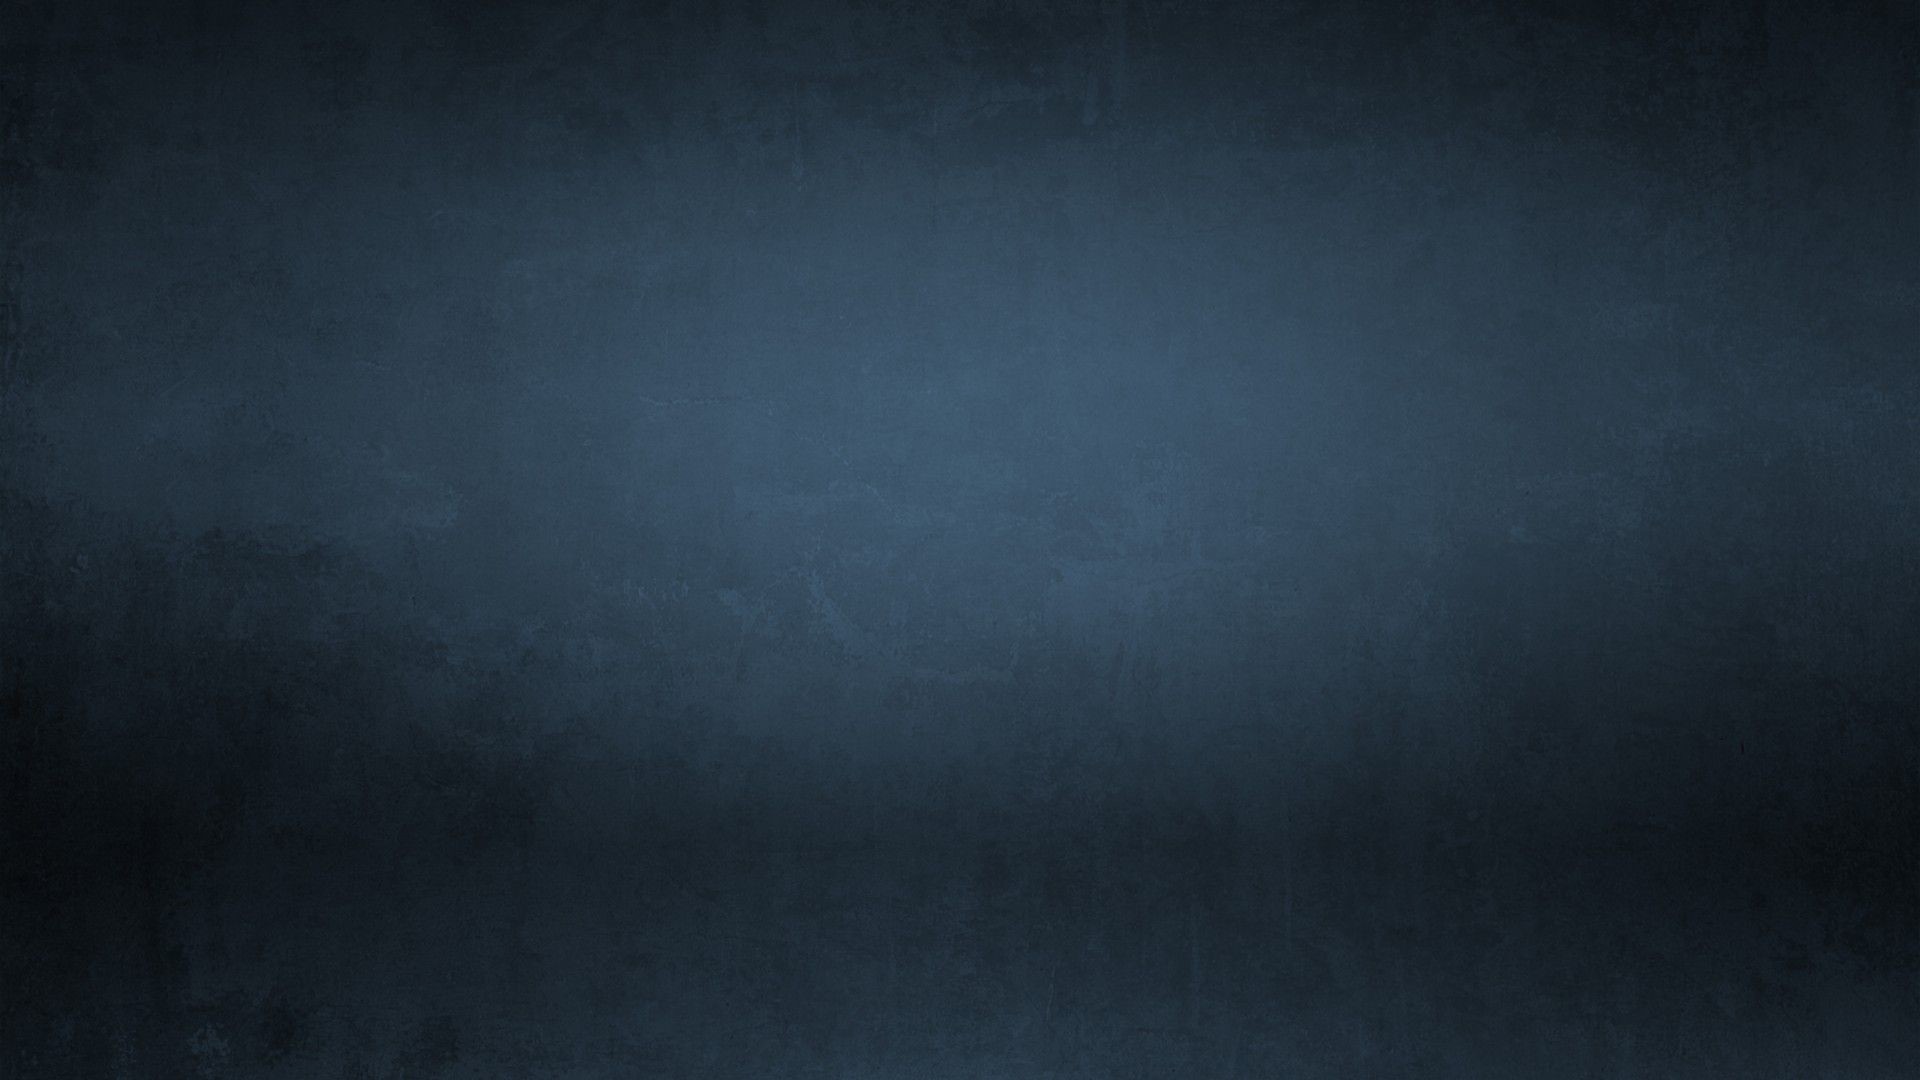 1920x1080 Download Cool Blue Textured Backgrounds 6923  px High .